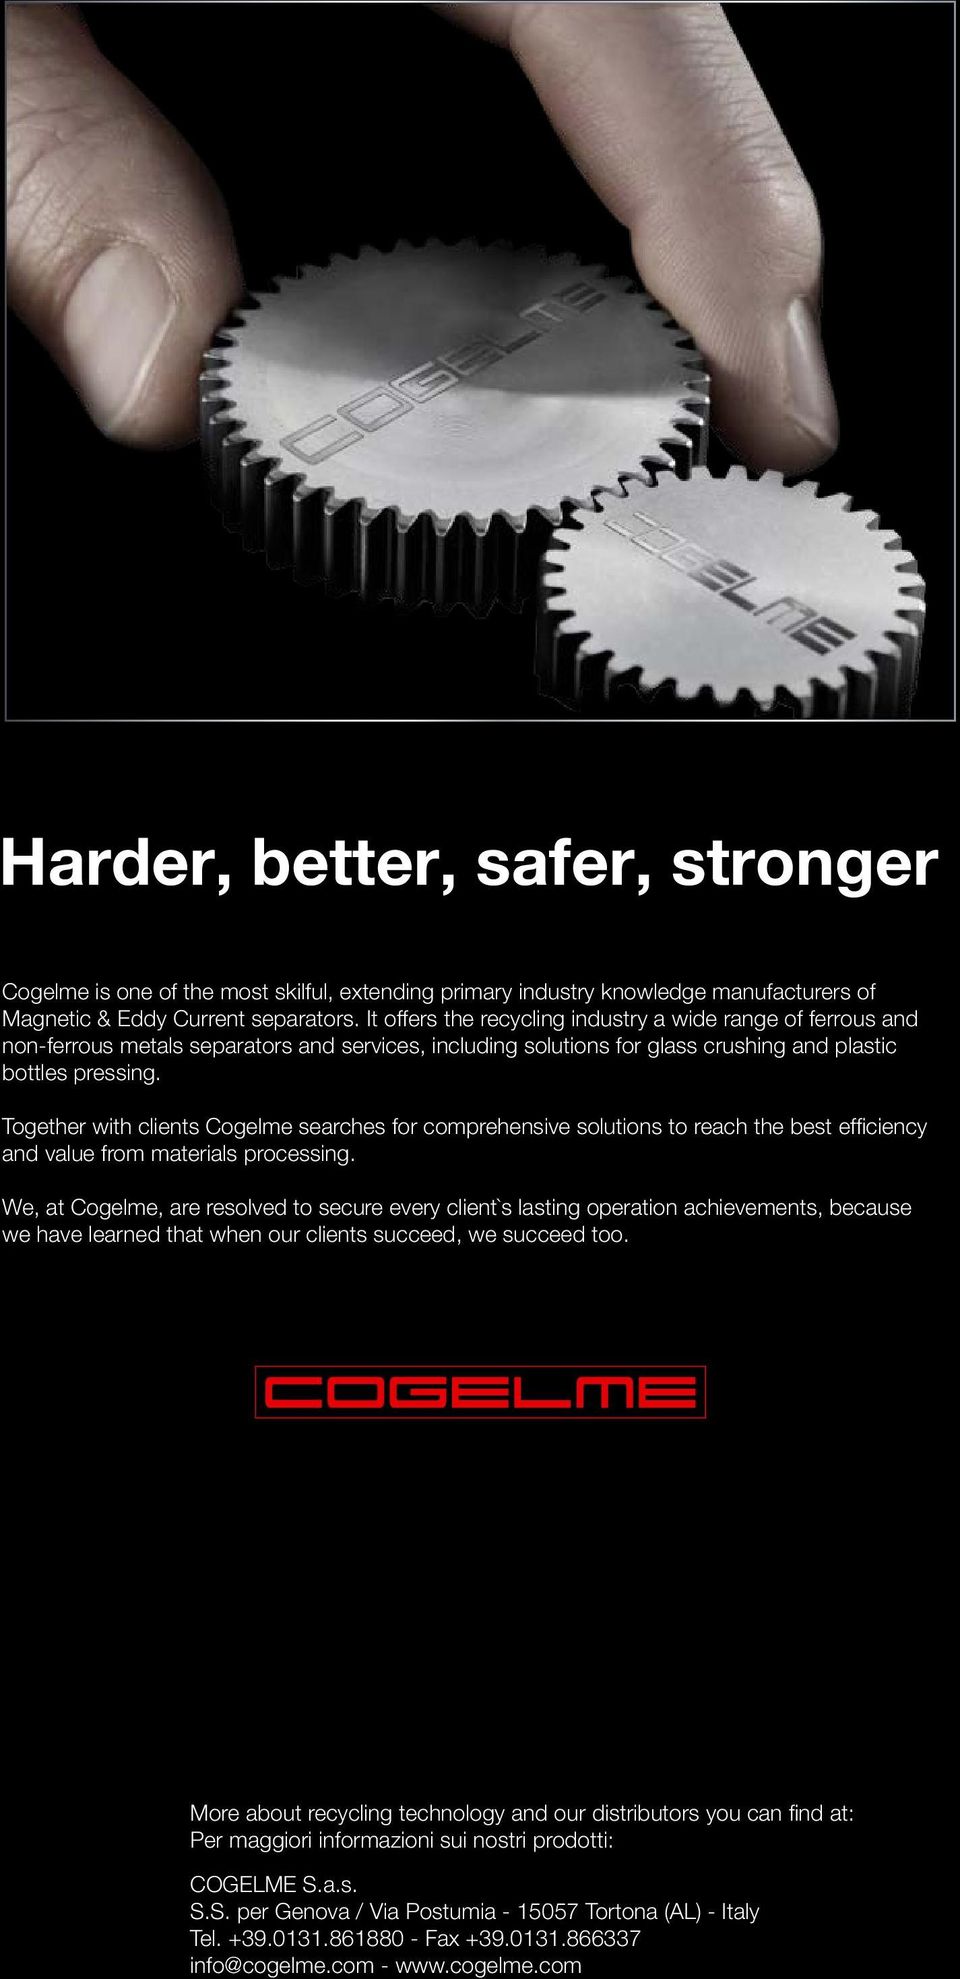 Together with clients Cogelme searches for comprehensive solutions to reach the best efficiency and value from materials processing.